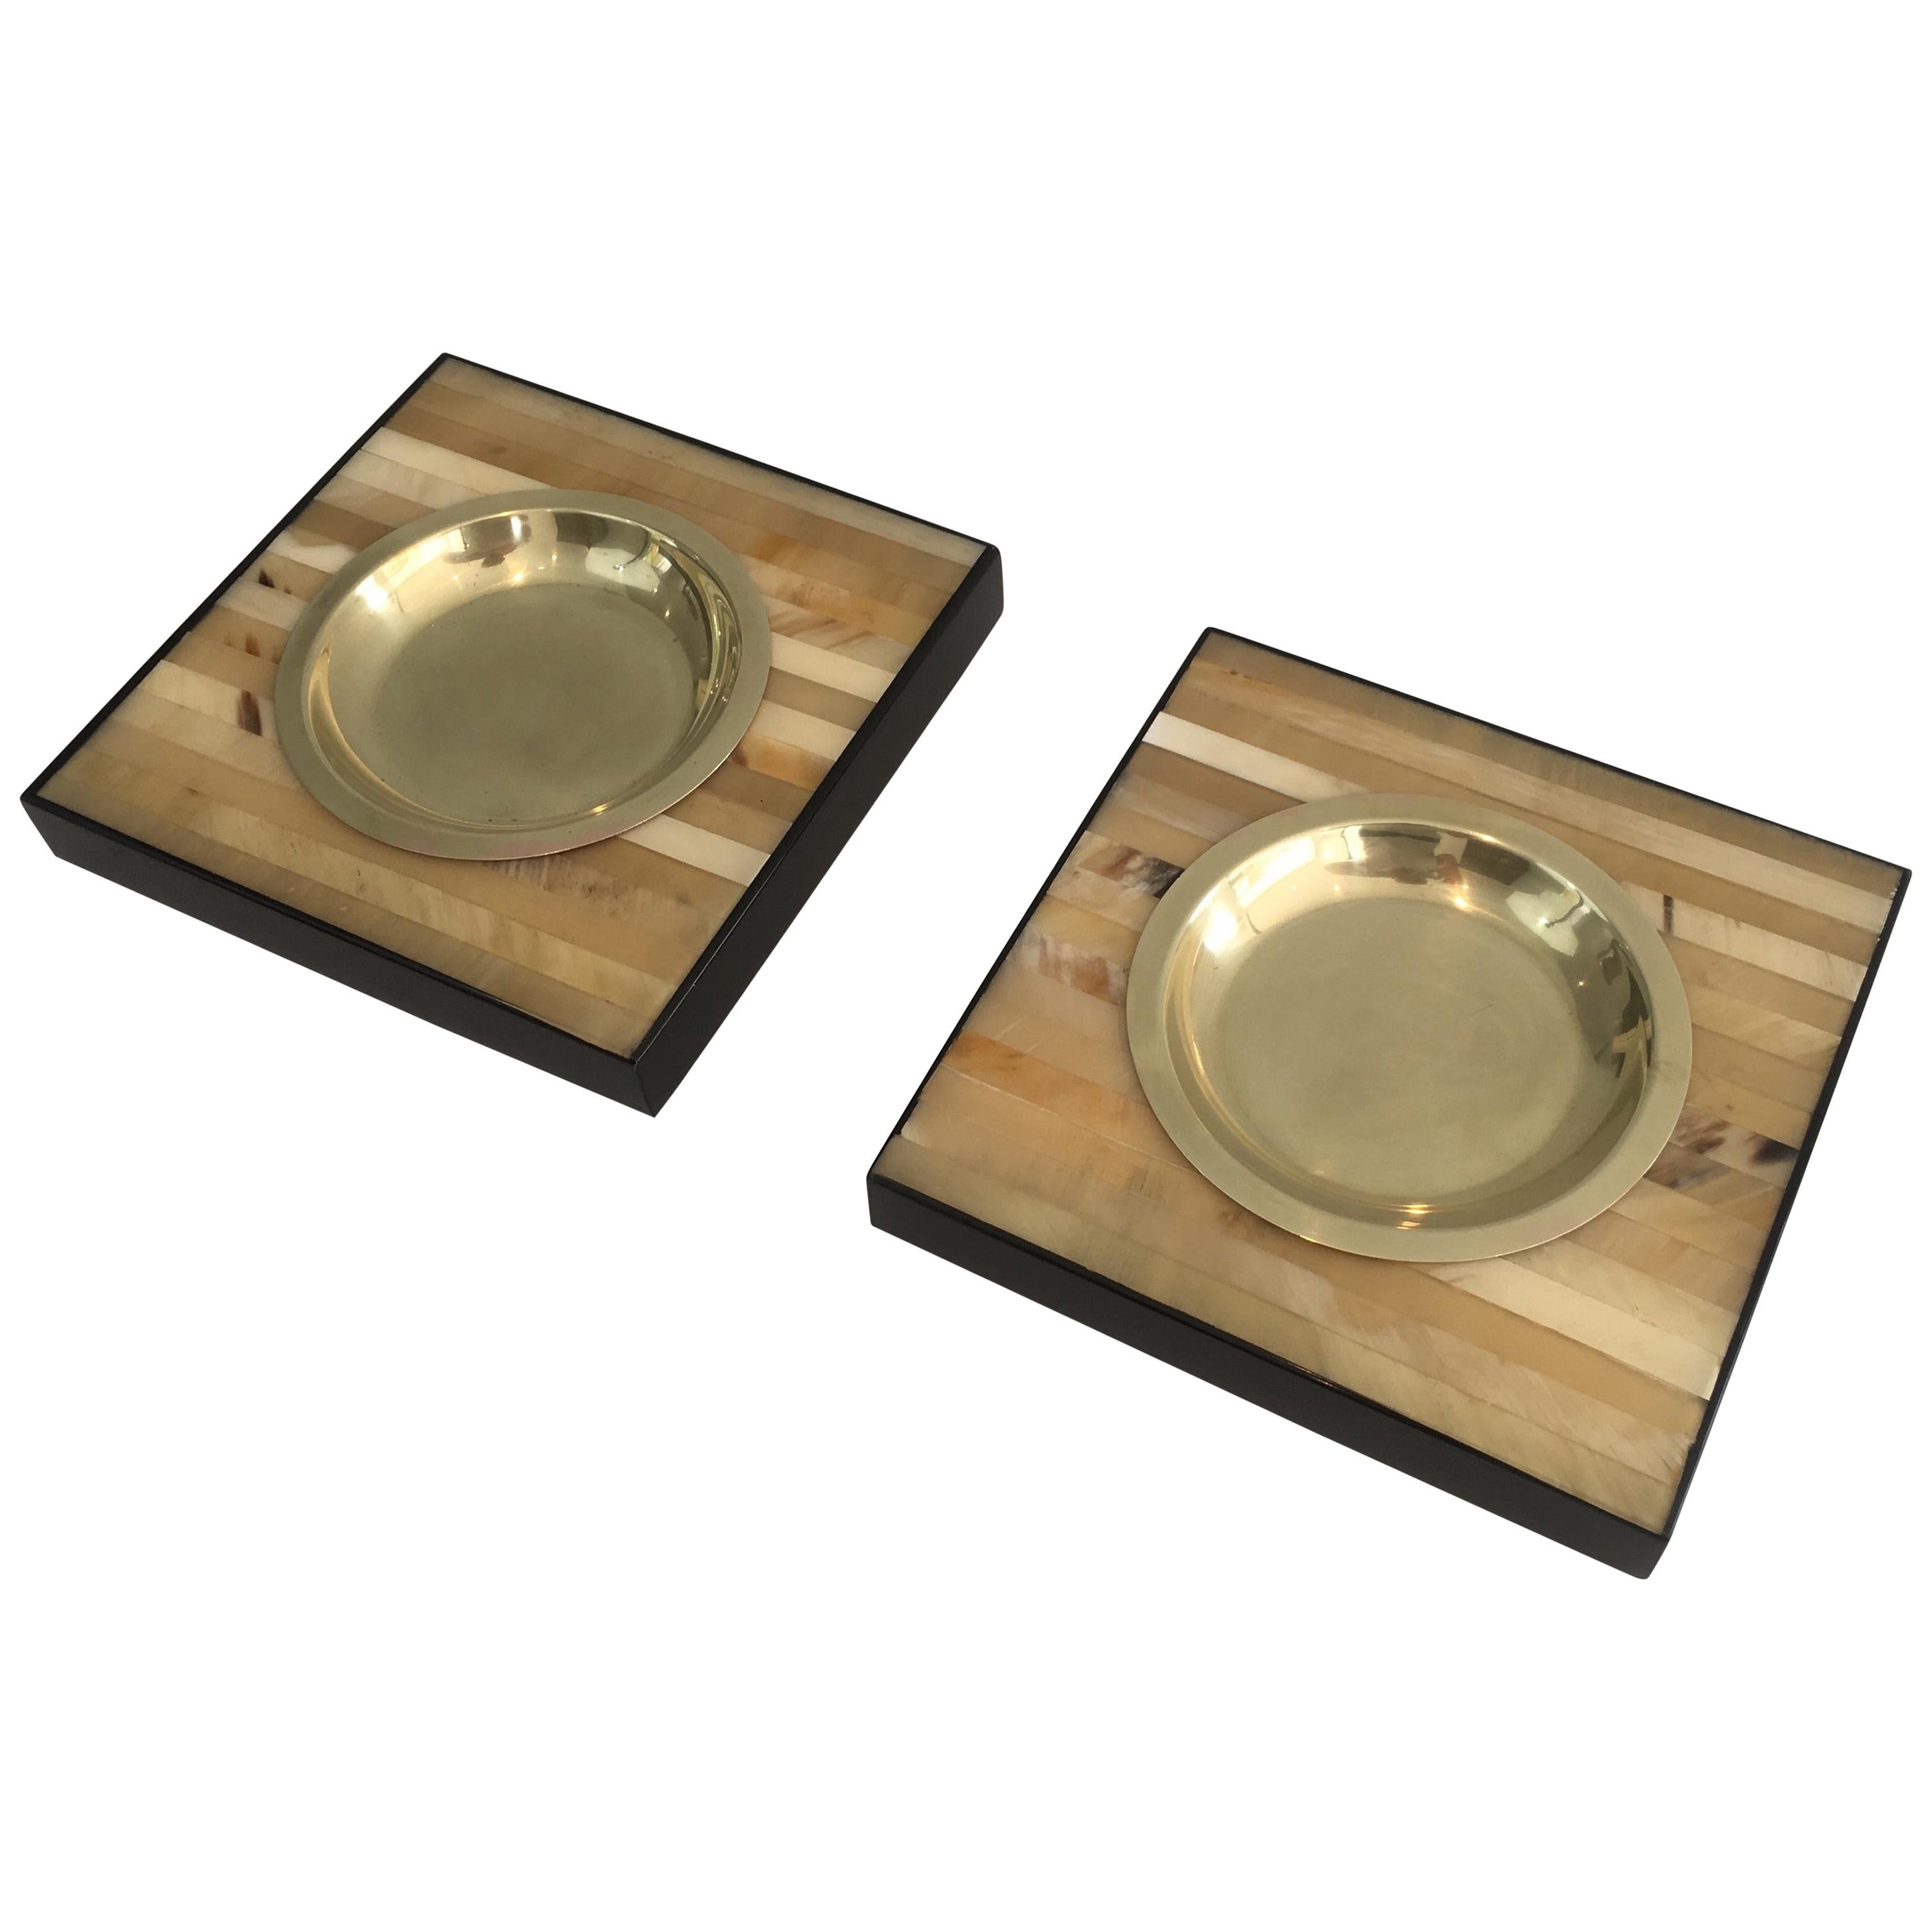 Pair of Wood and Brass Ashtrays or Vide-Poches, Italy, circa 1970